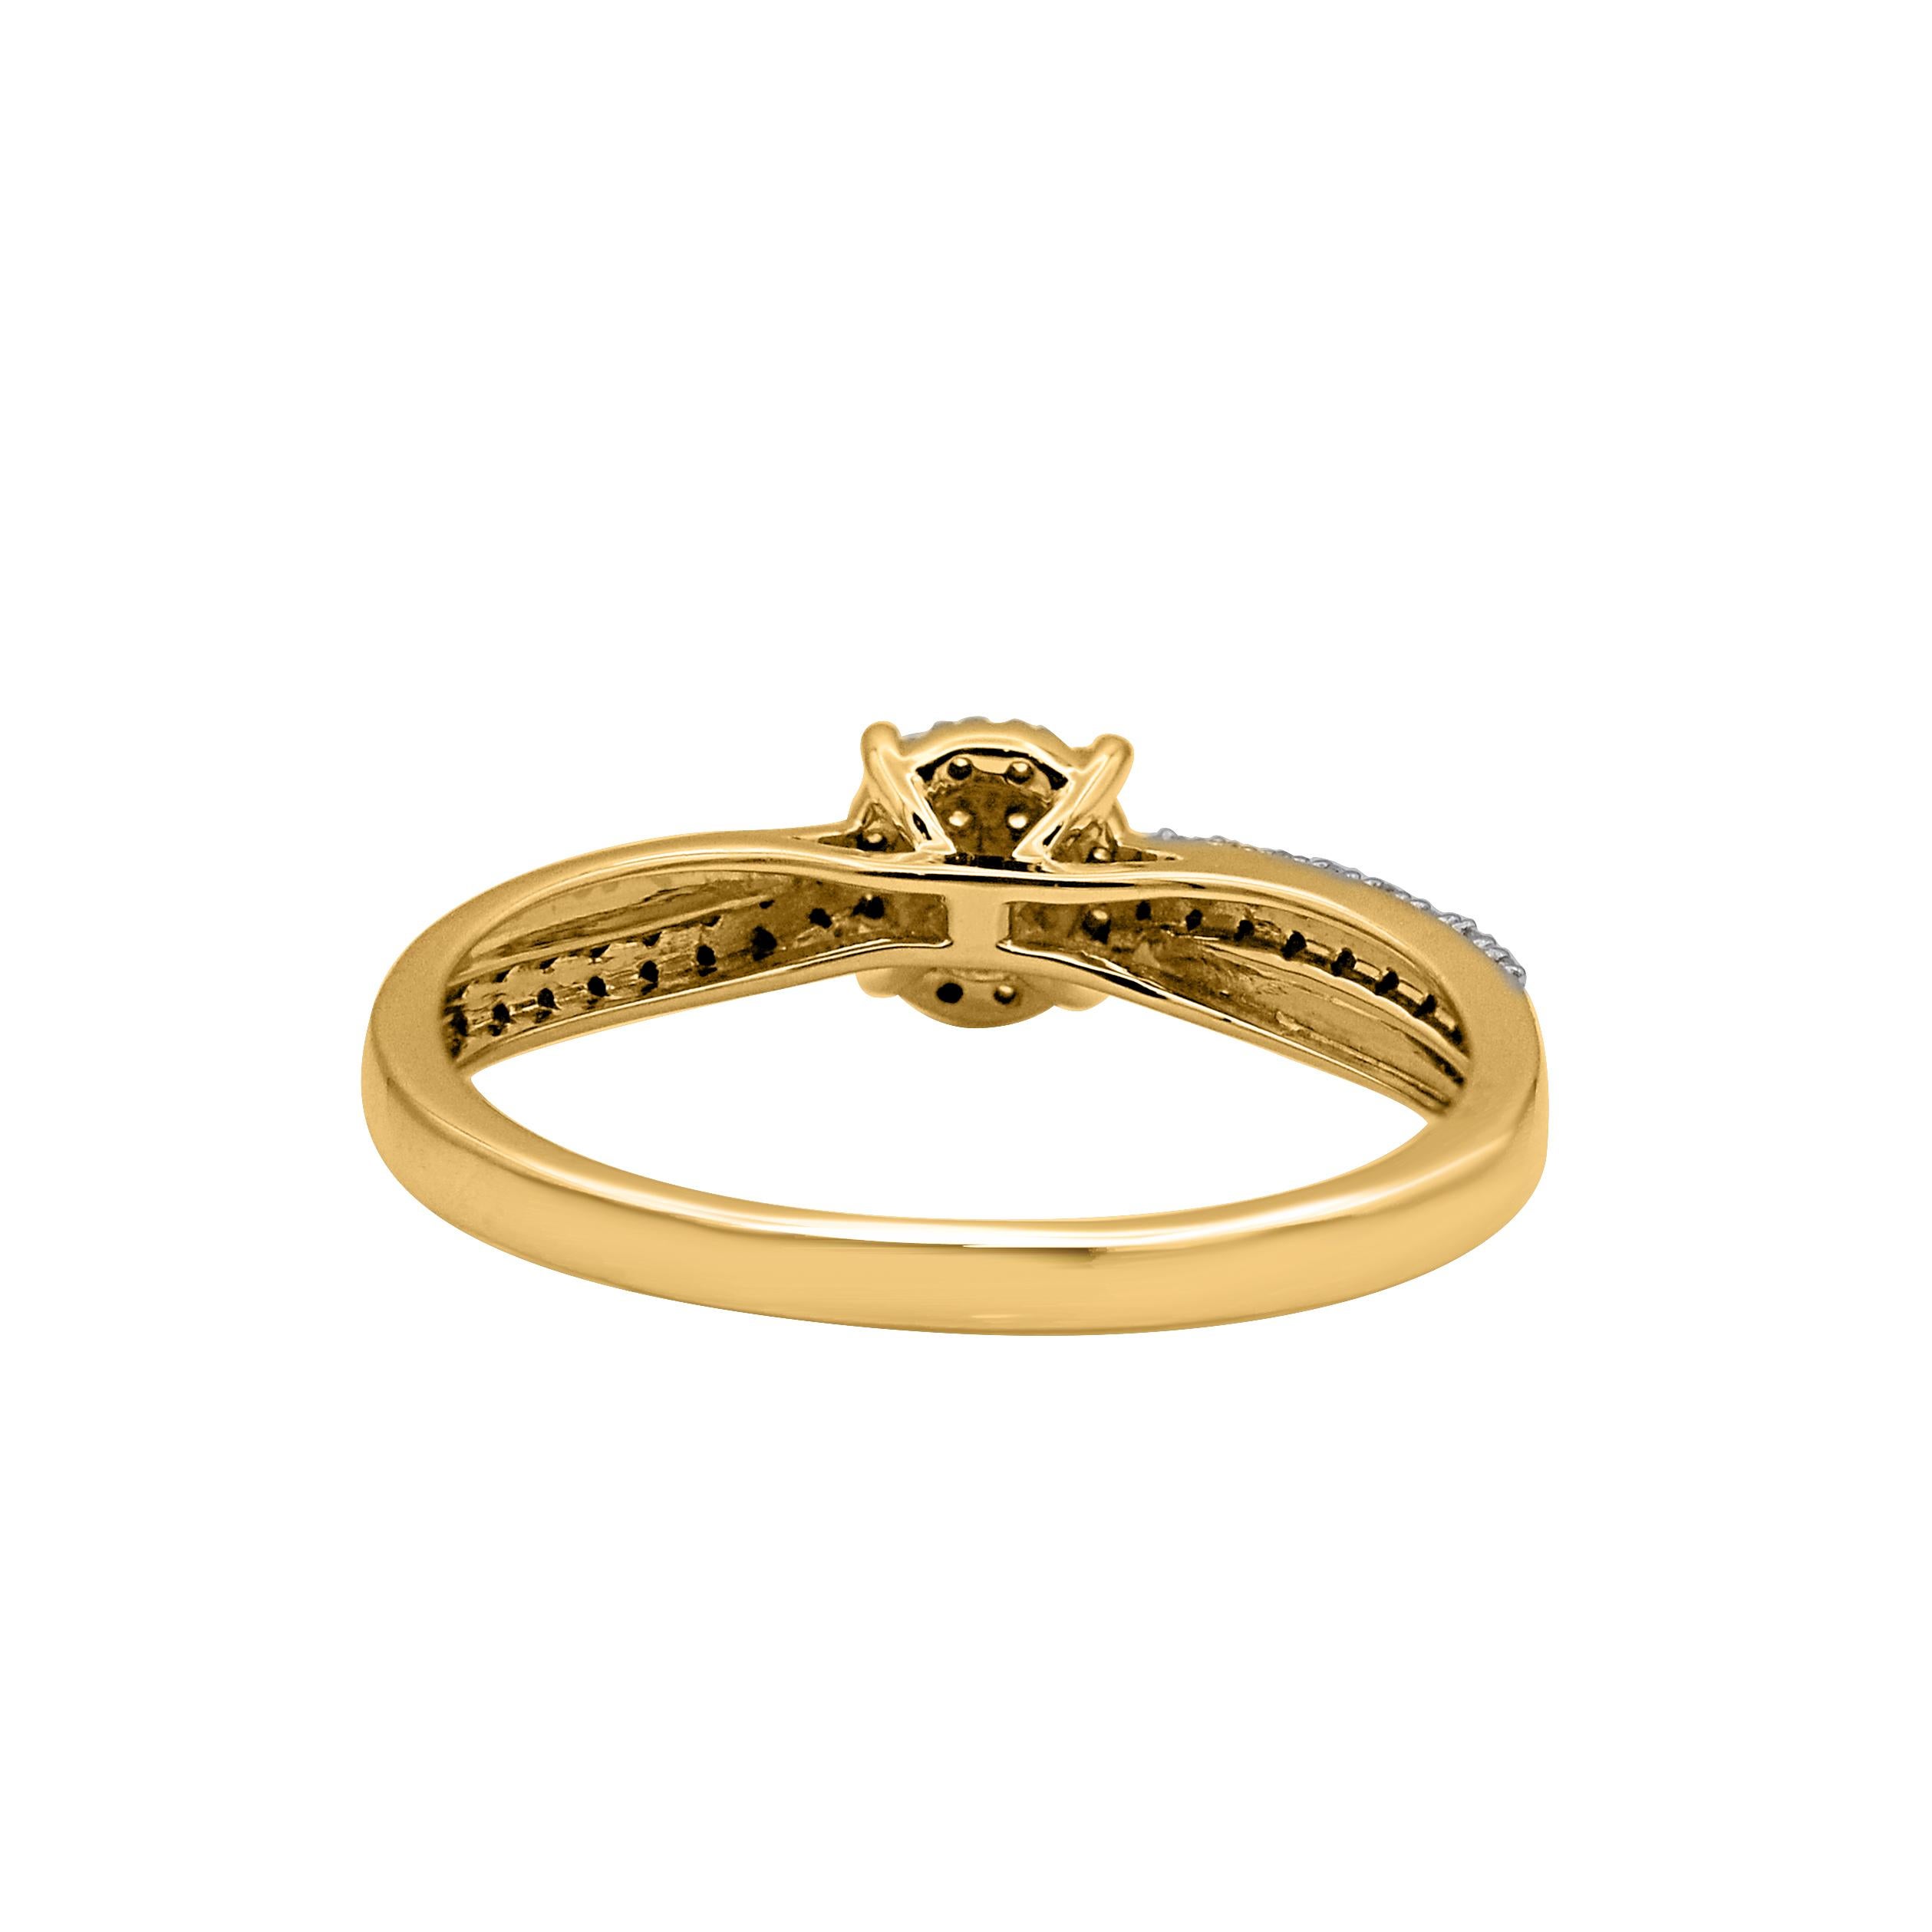 Round Cut TJD 0.15 Carat Natural Round Diamond Engagement Ring in 14KT Yellow Gold For Sale